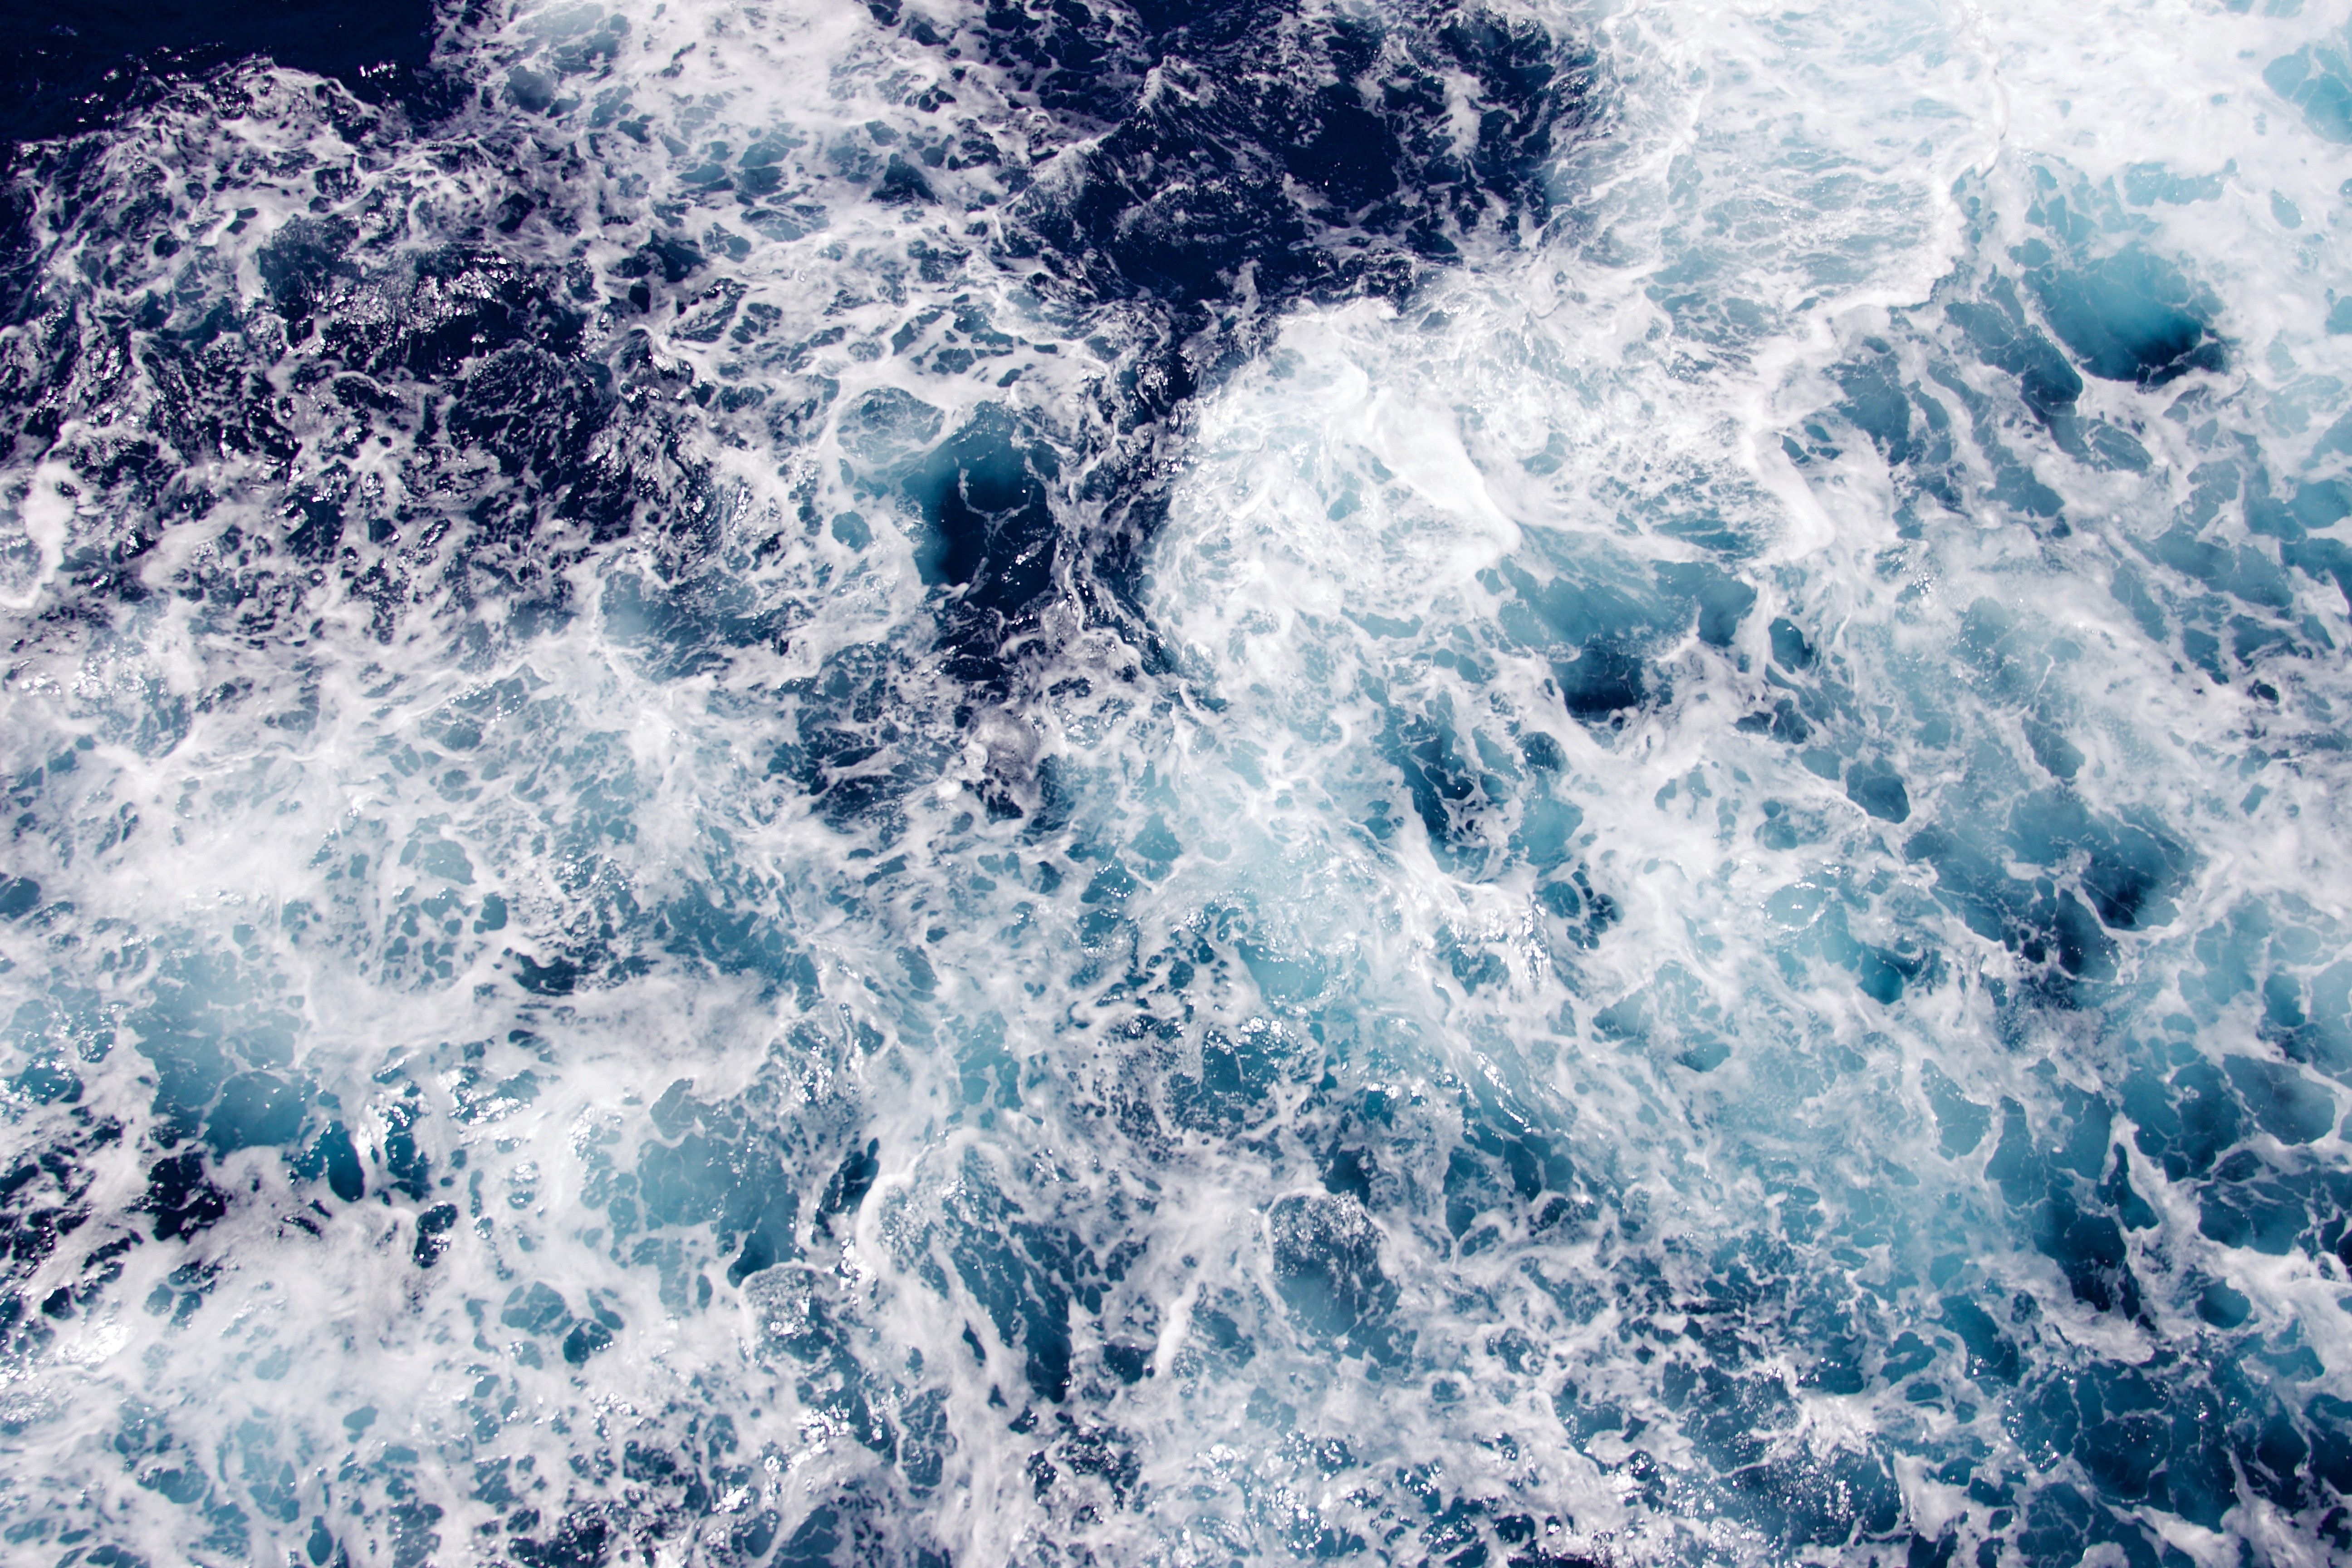 A view of the ocean from above - Wave, ocean